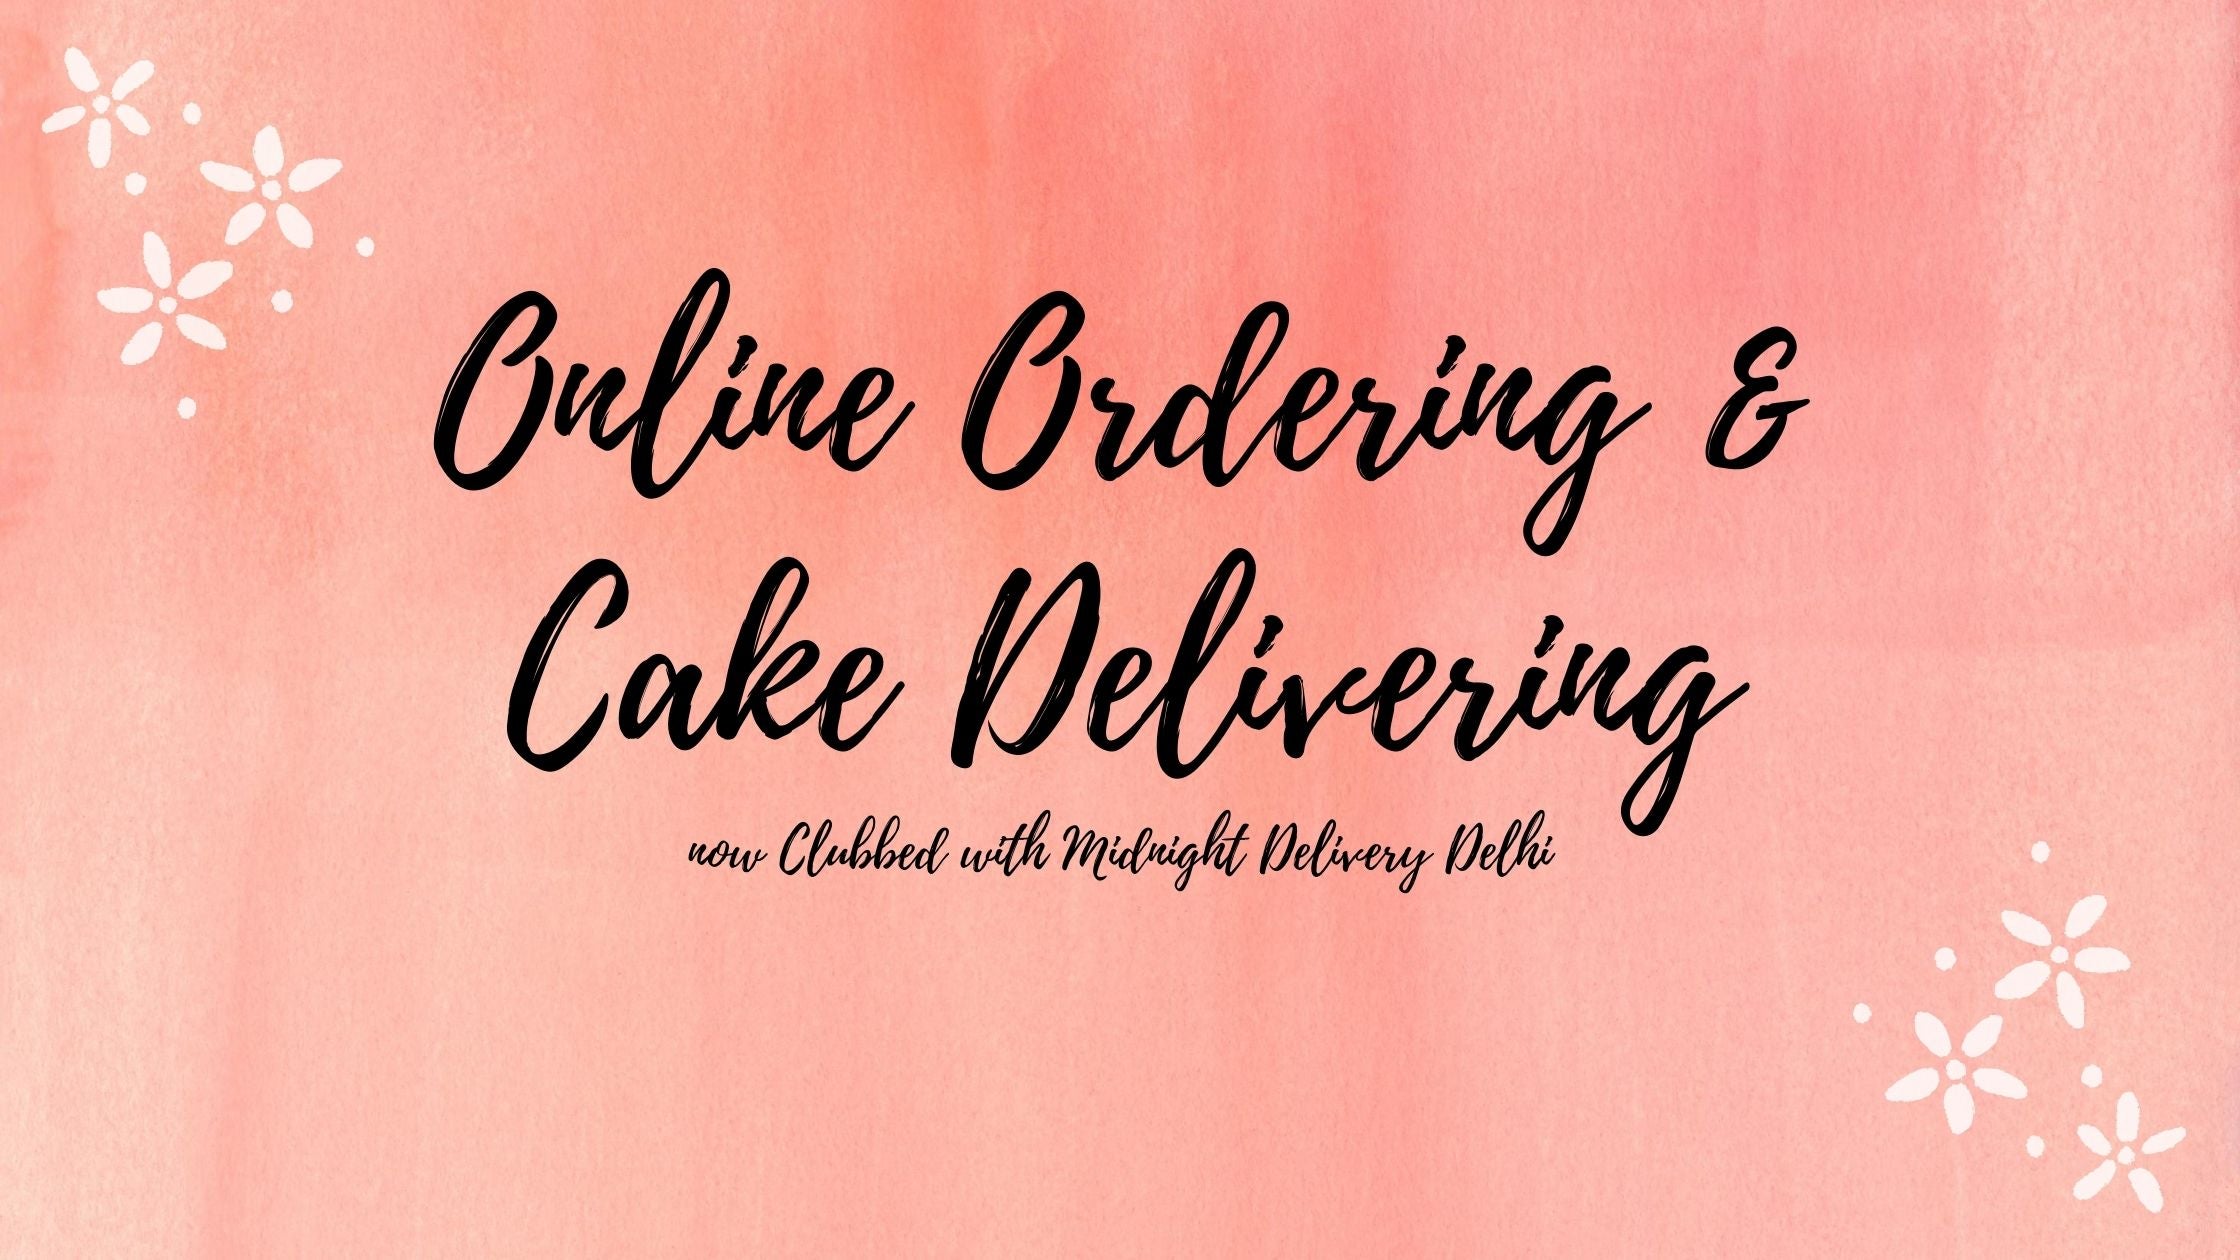 Online Ordering & Cake Delivering now Clubbed with Midnight Delivery Delhi